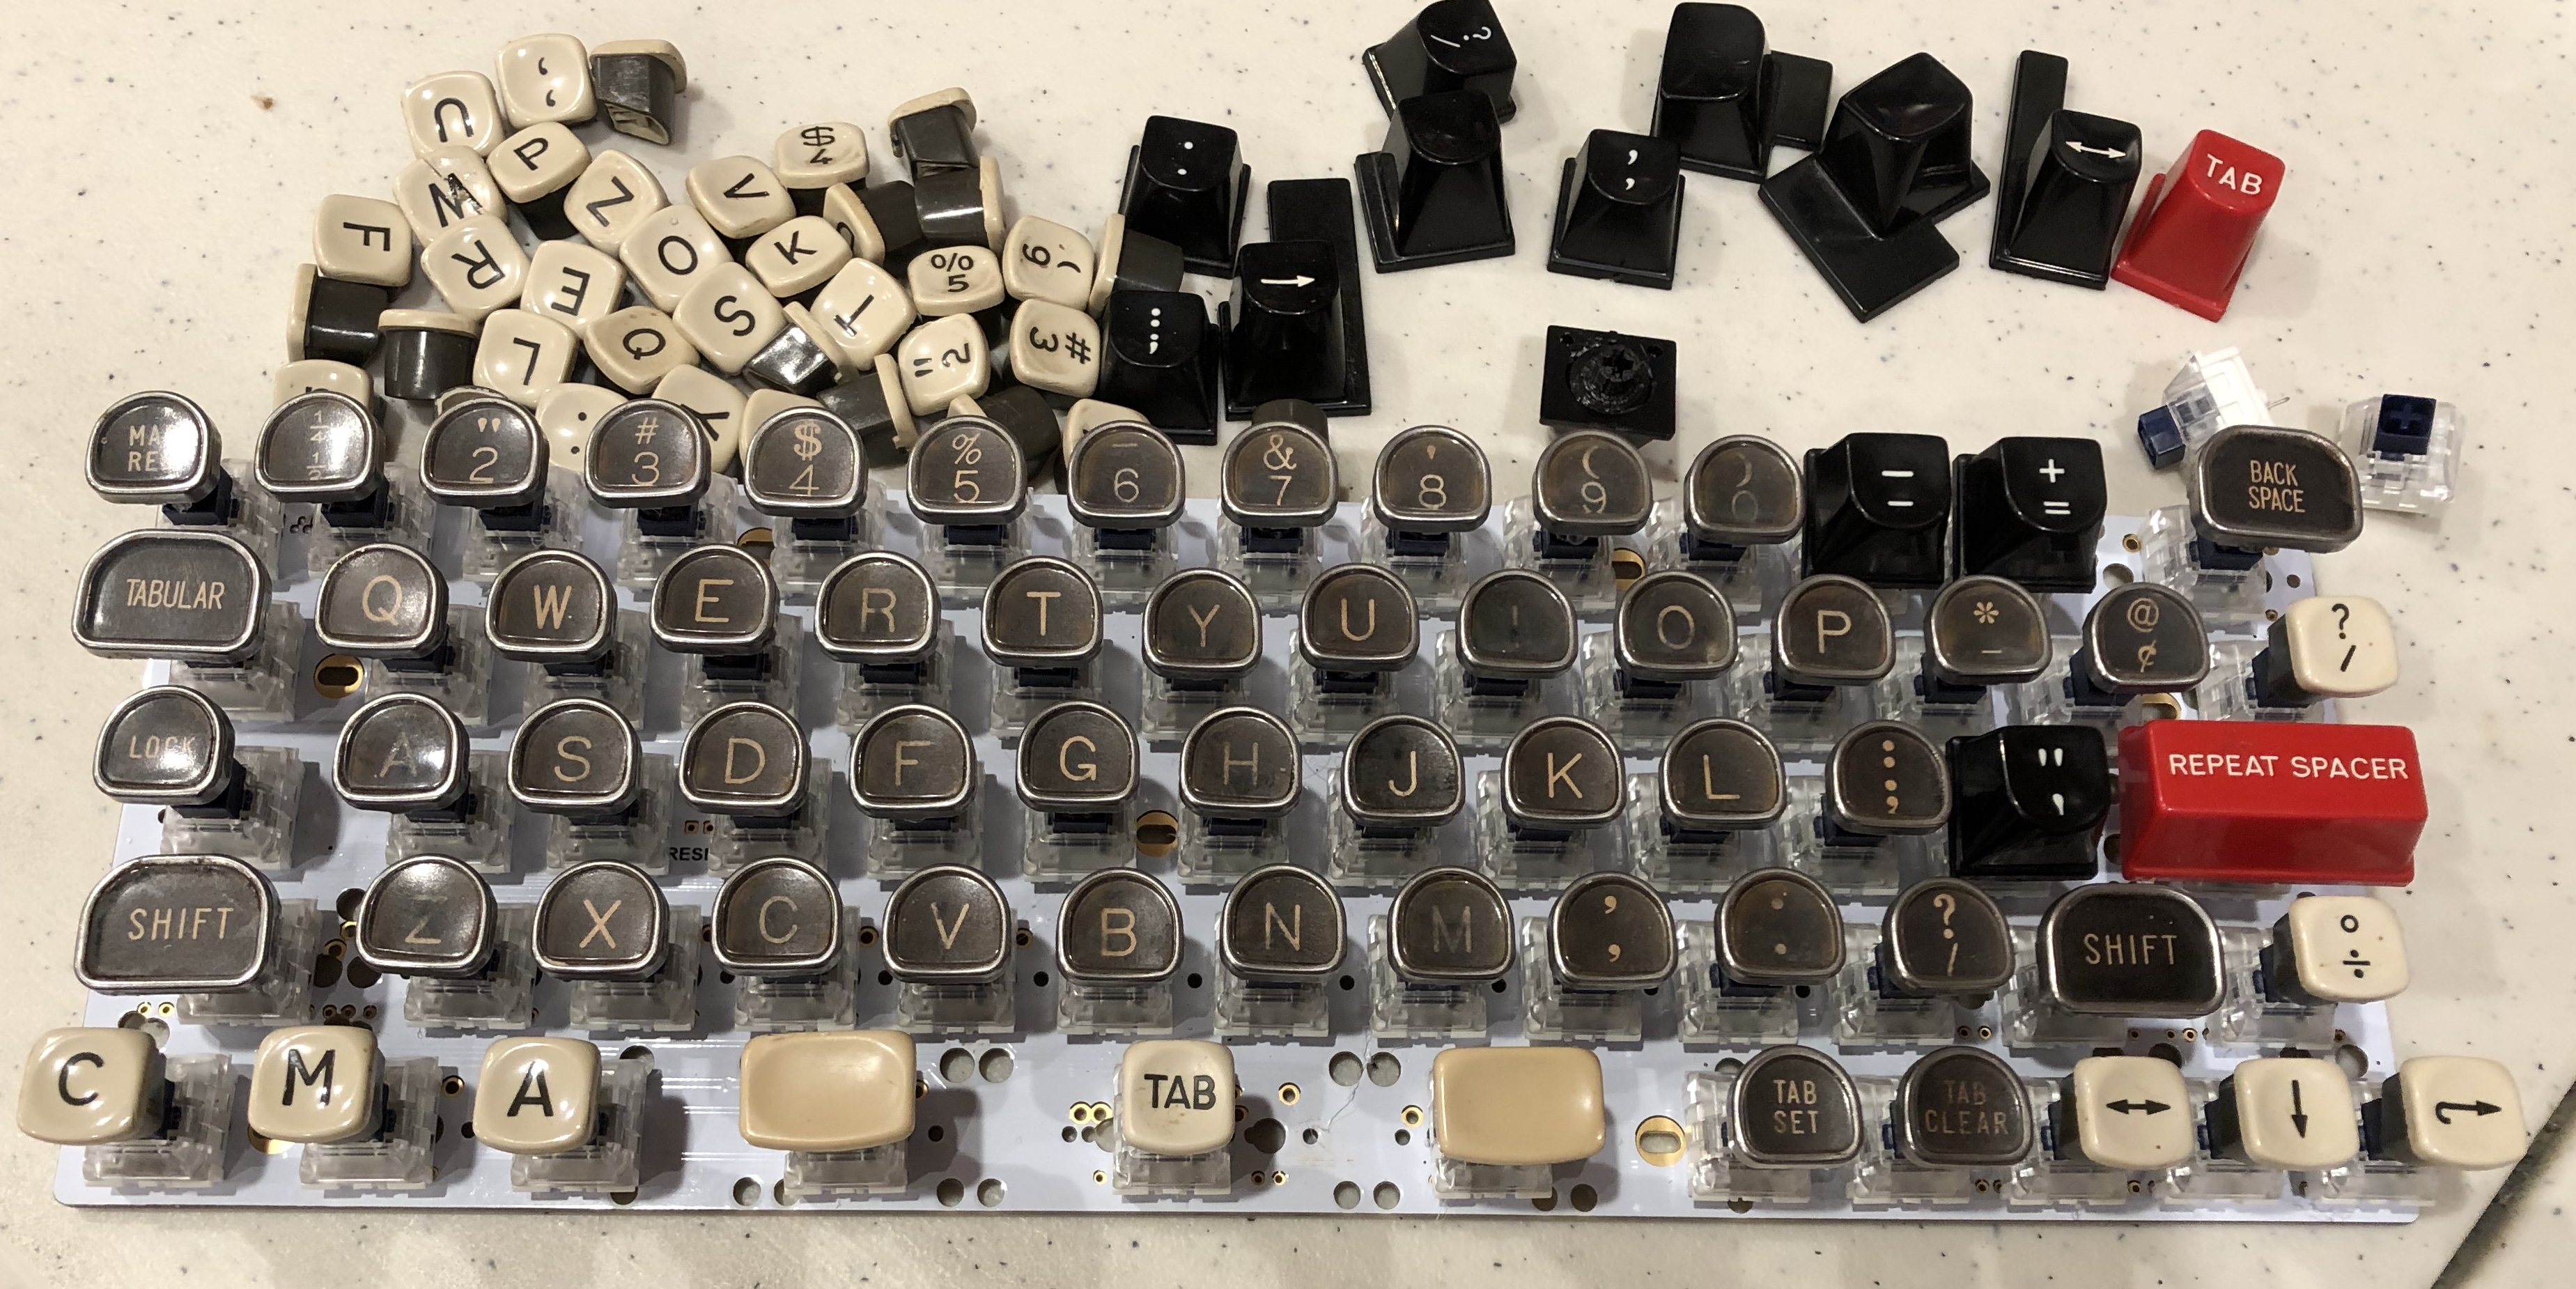 Picture of typewriter keyboard without case, with more typewriter keys clustered near it